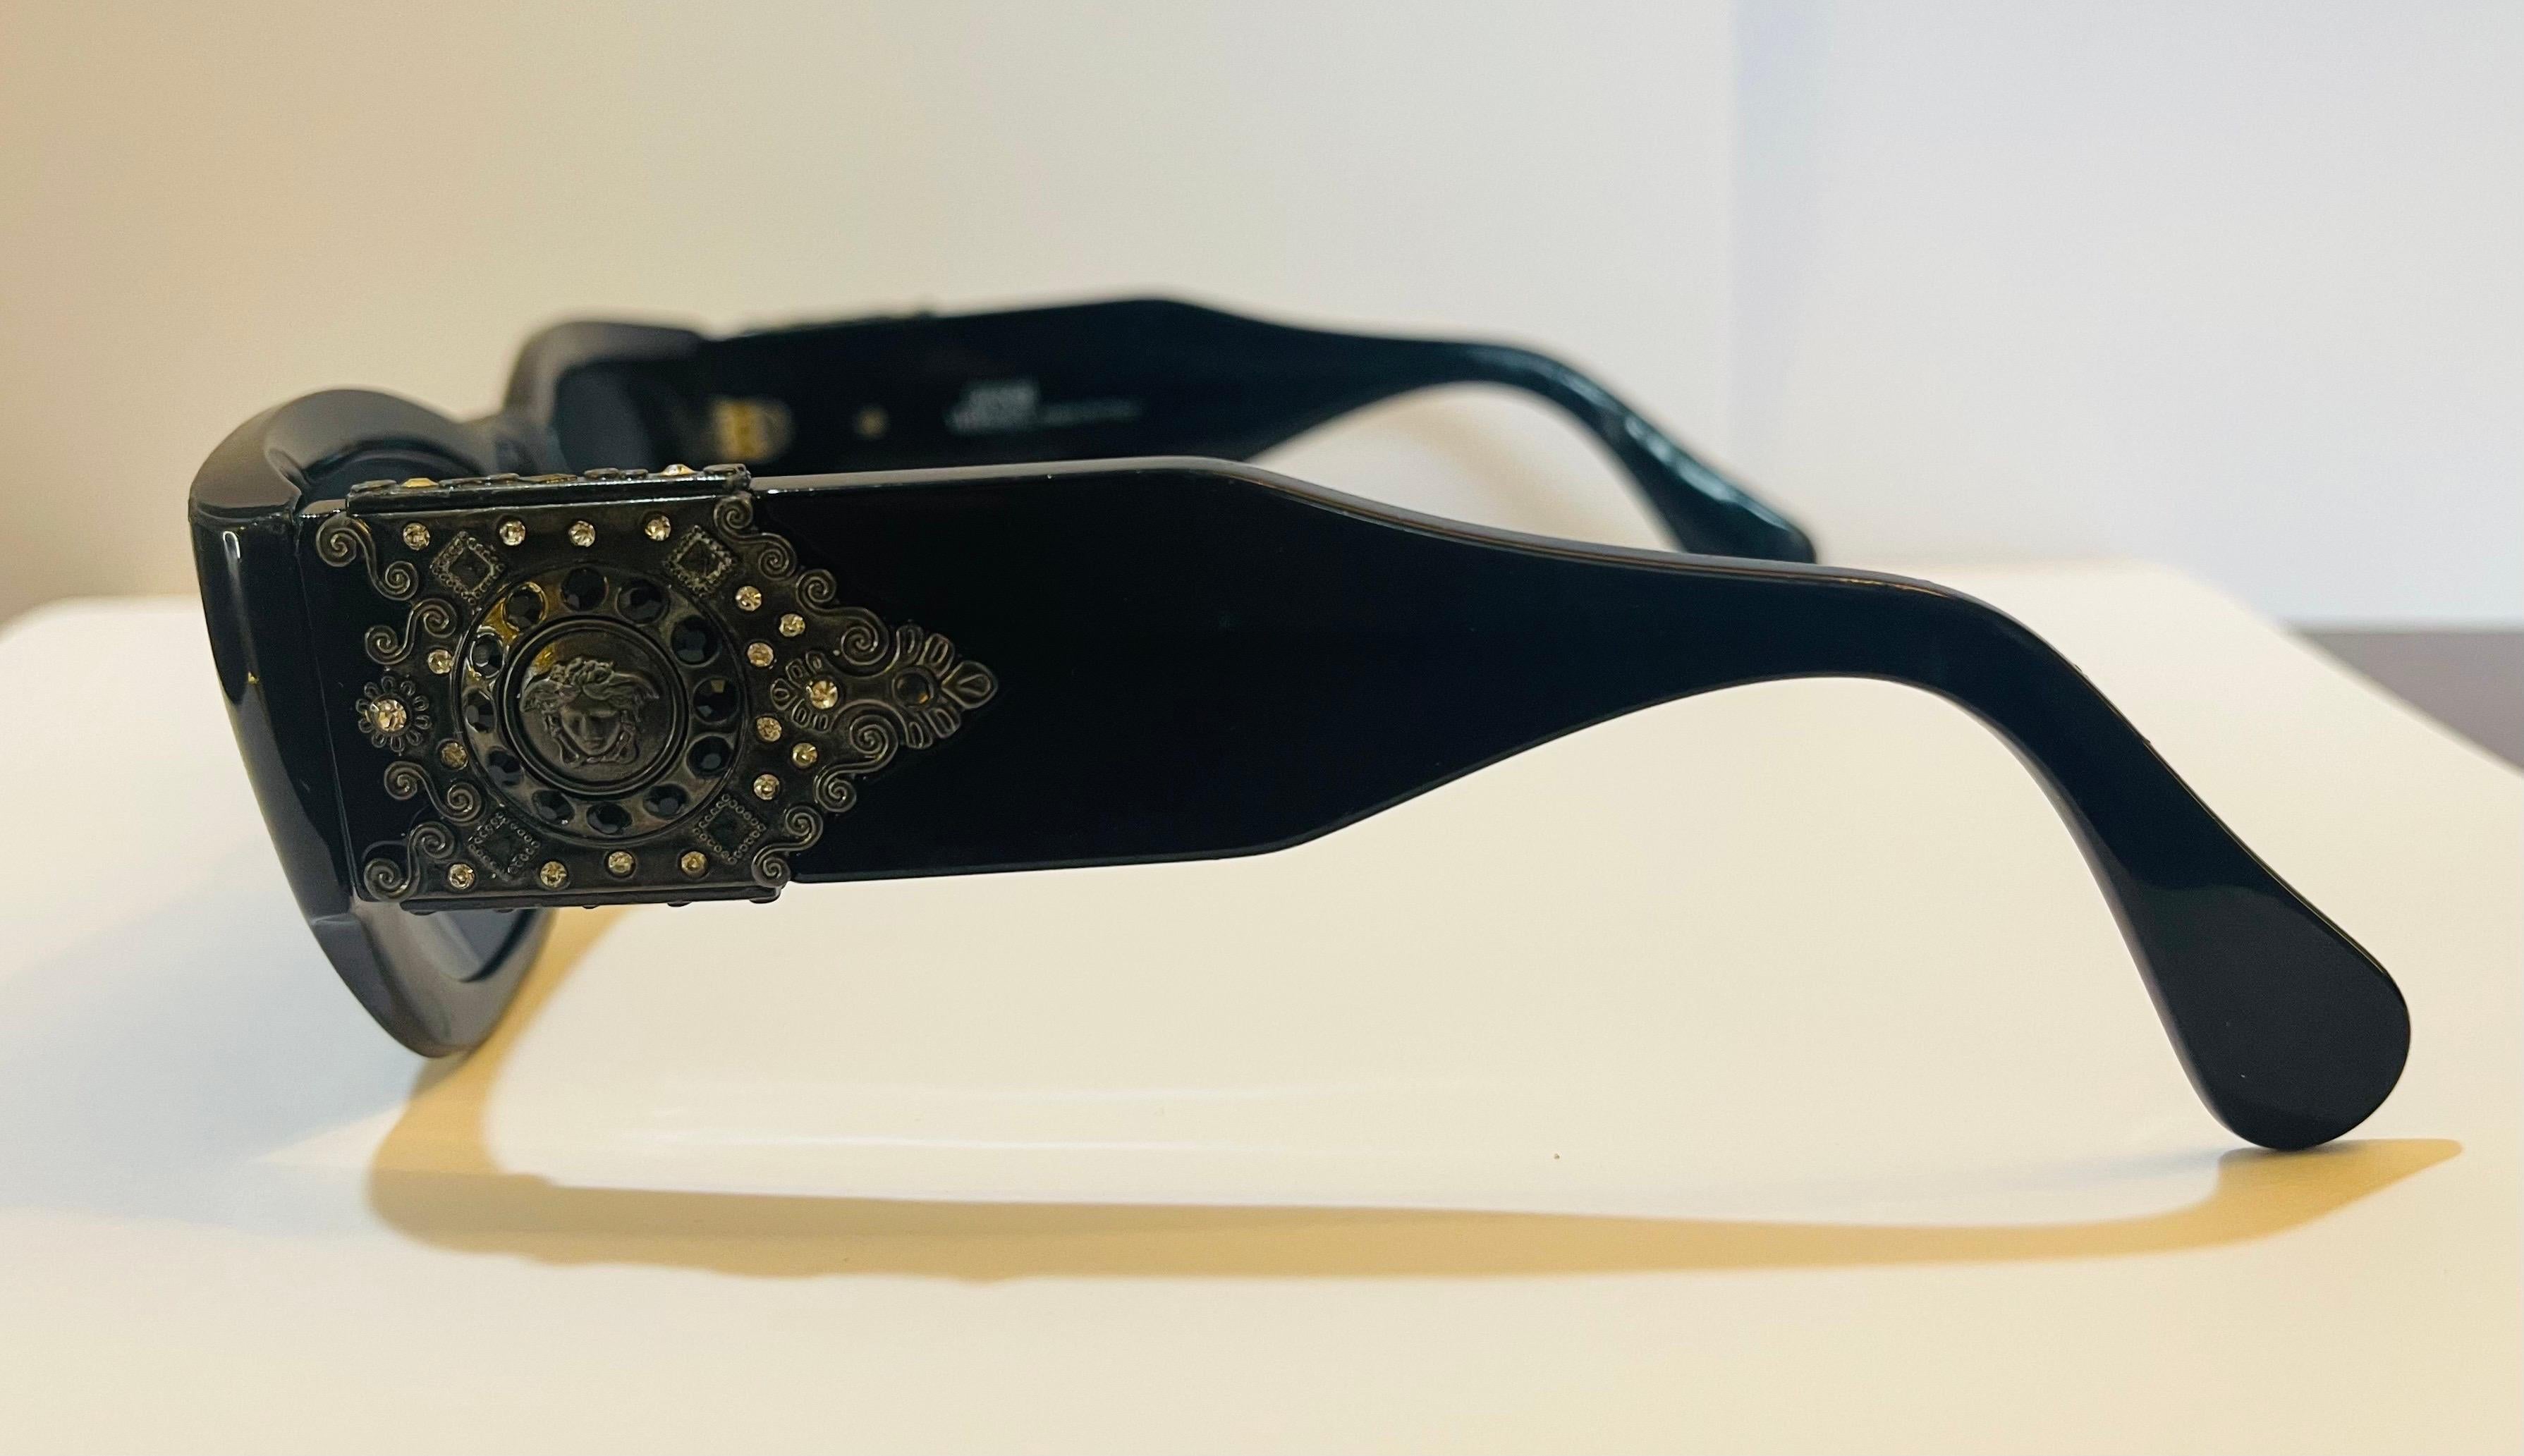 Extremely rare vintage Gianni Versace black sunglasses with iconic Medusa motif and rhinestones.